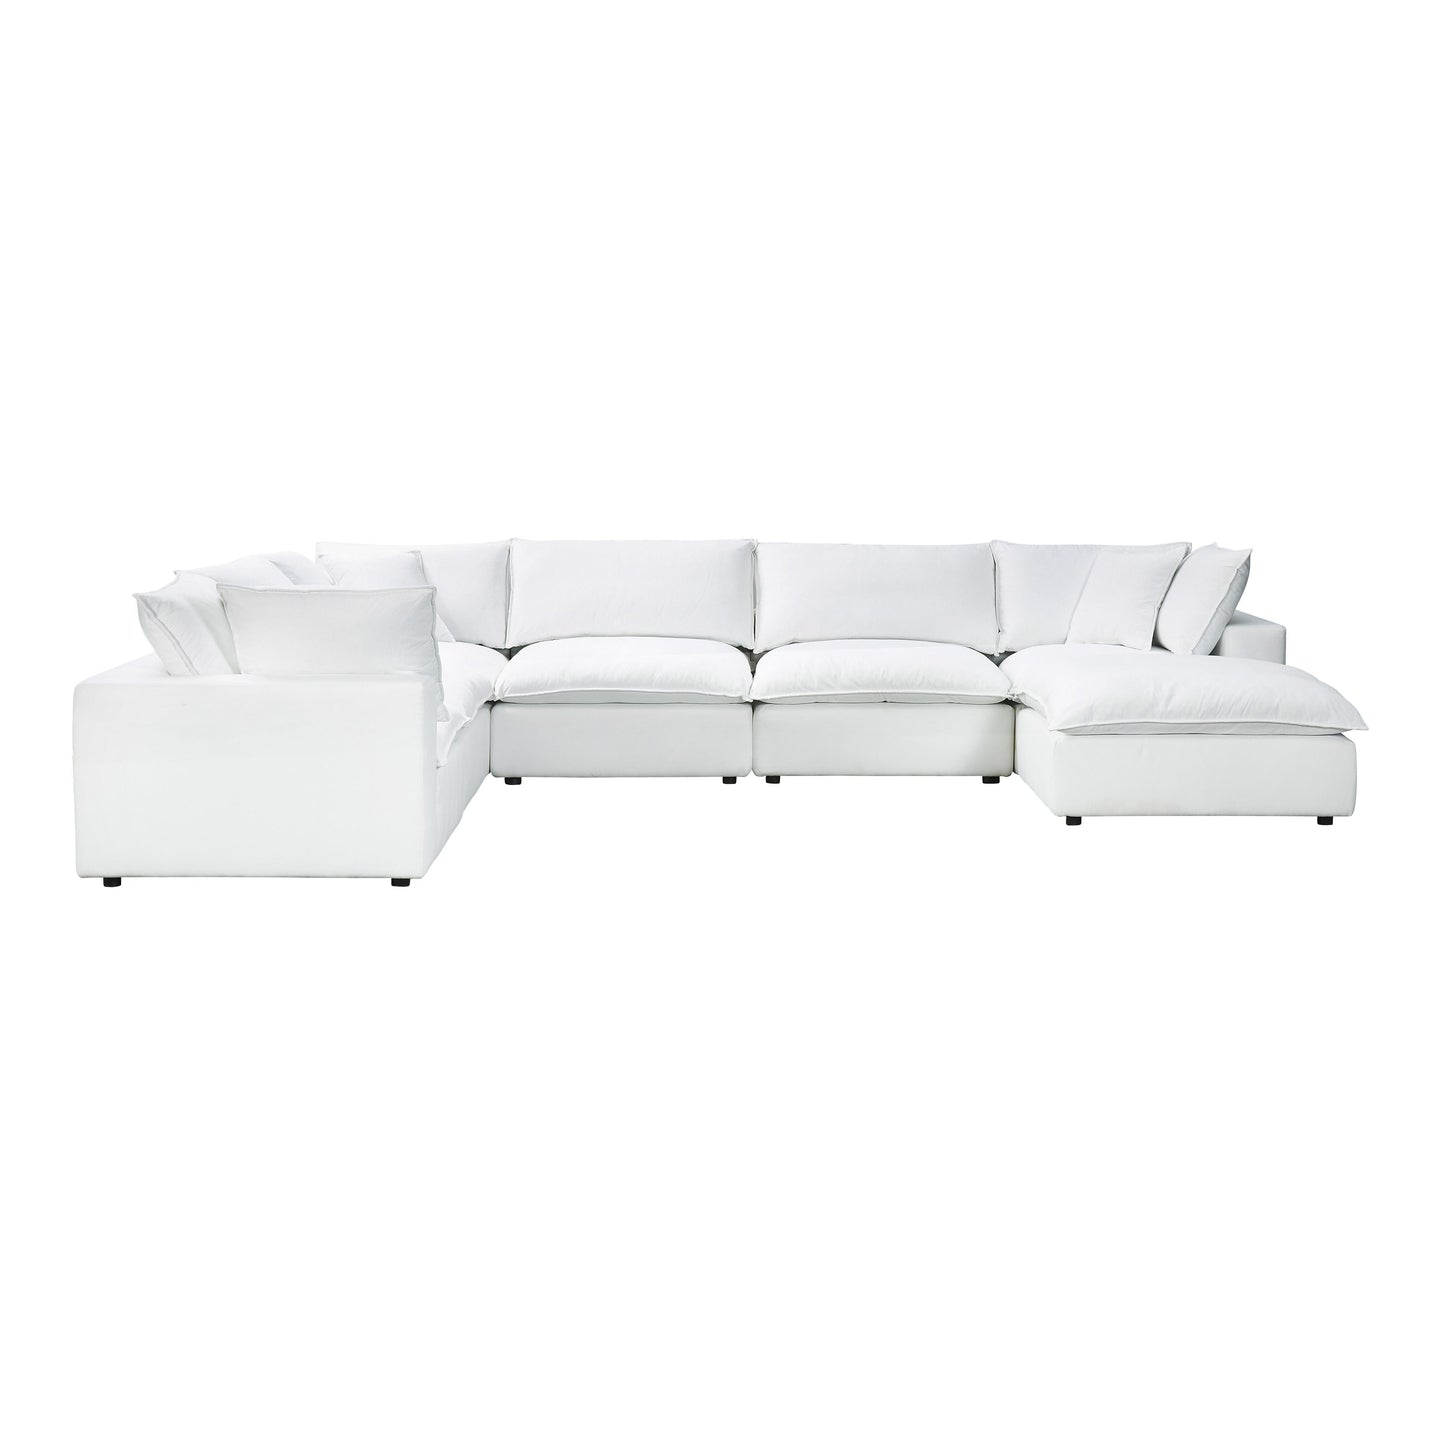 Tov Furniture Cali Pearl Modular Large Chaise Sectional